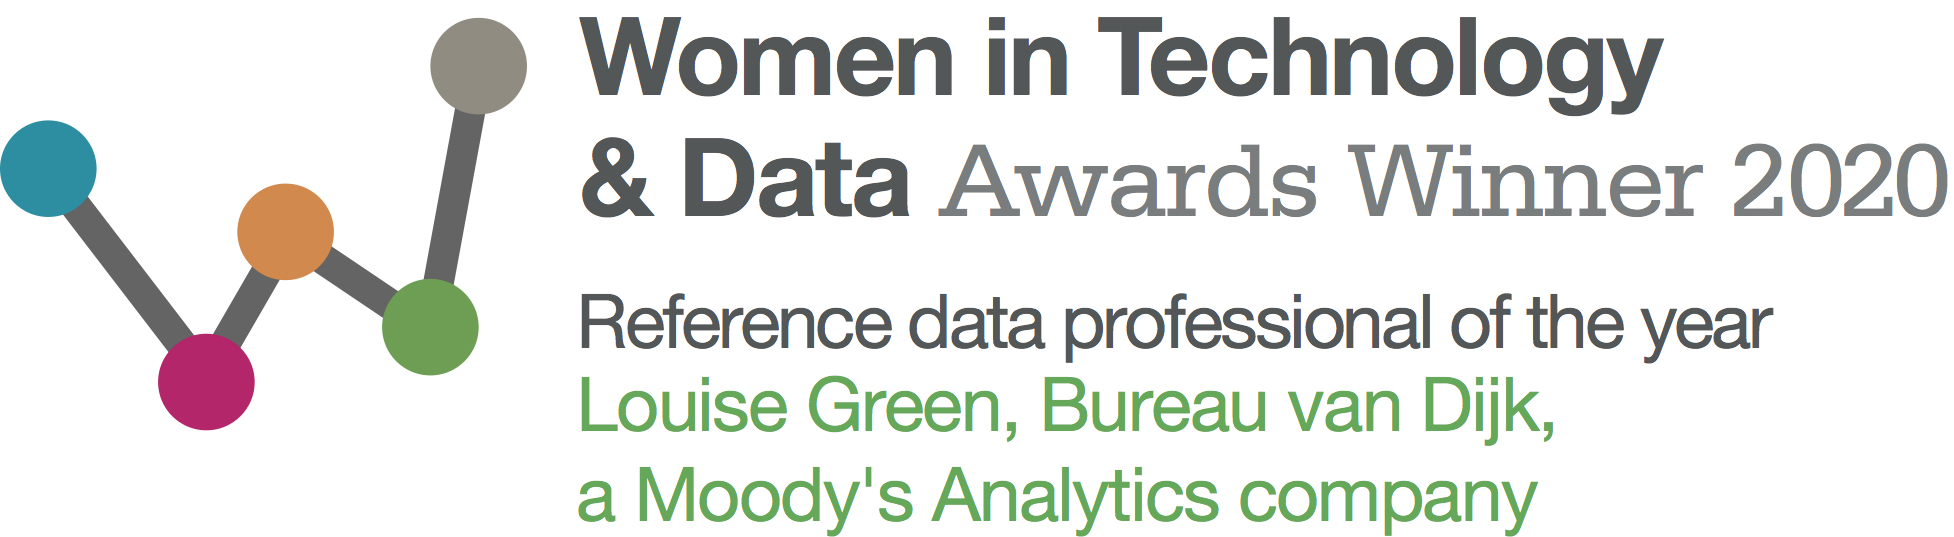 Louise Green of Bureau van Dijk Wins Reference Data Professional of the  Year at Women in Technology and Data Awards